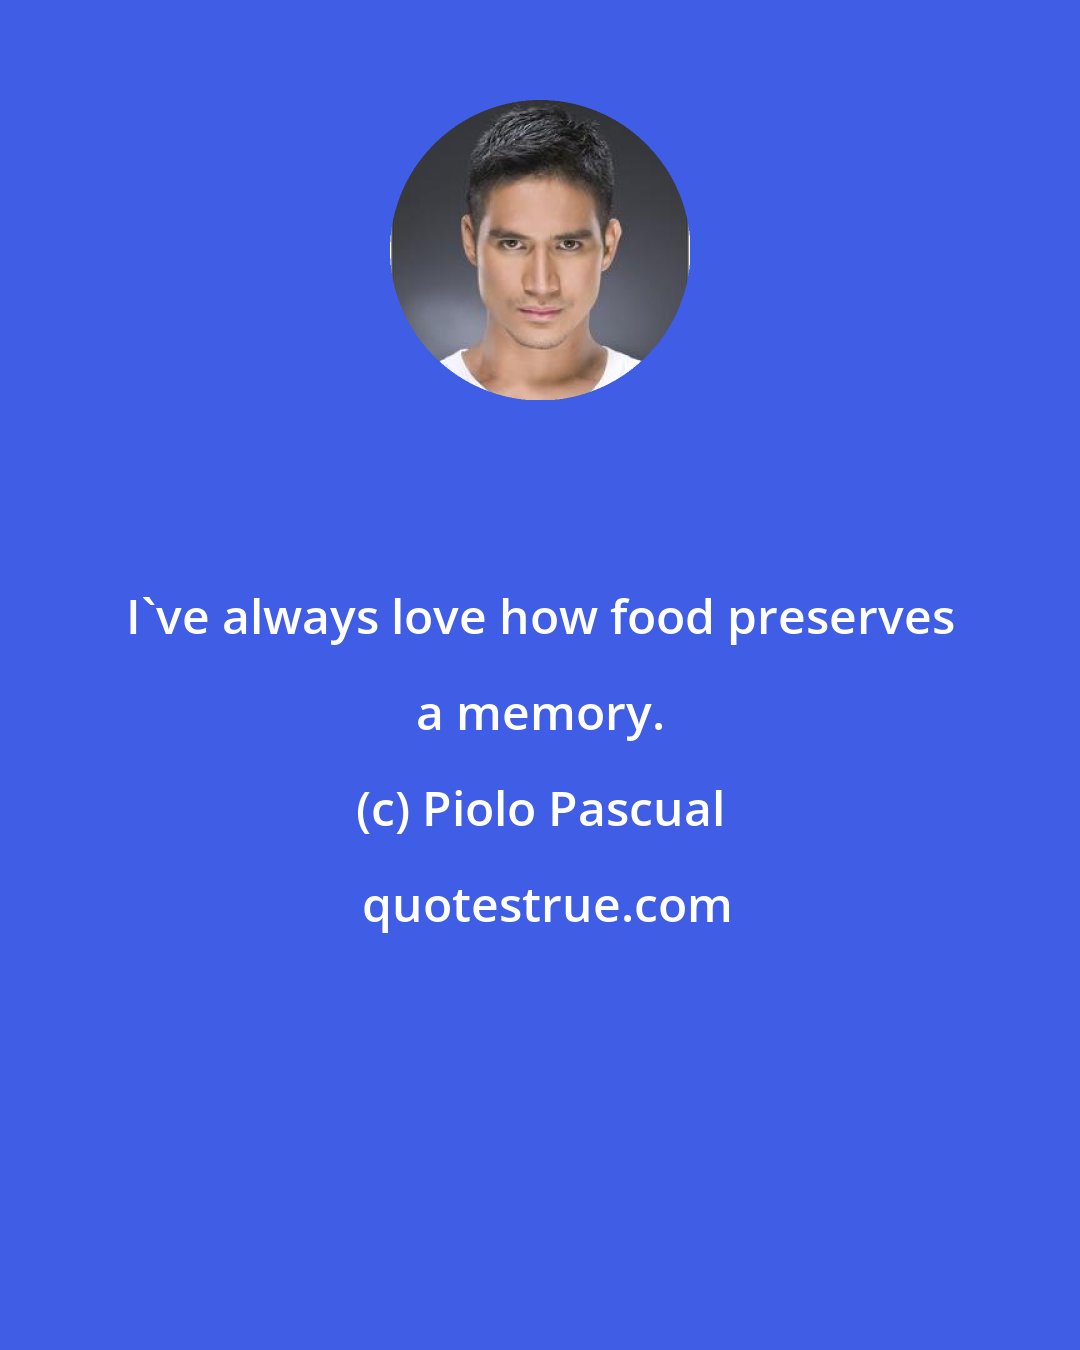 Piolo Pascual: I've always love how food preserves a memory.